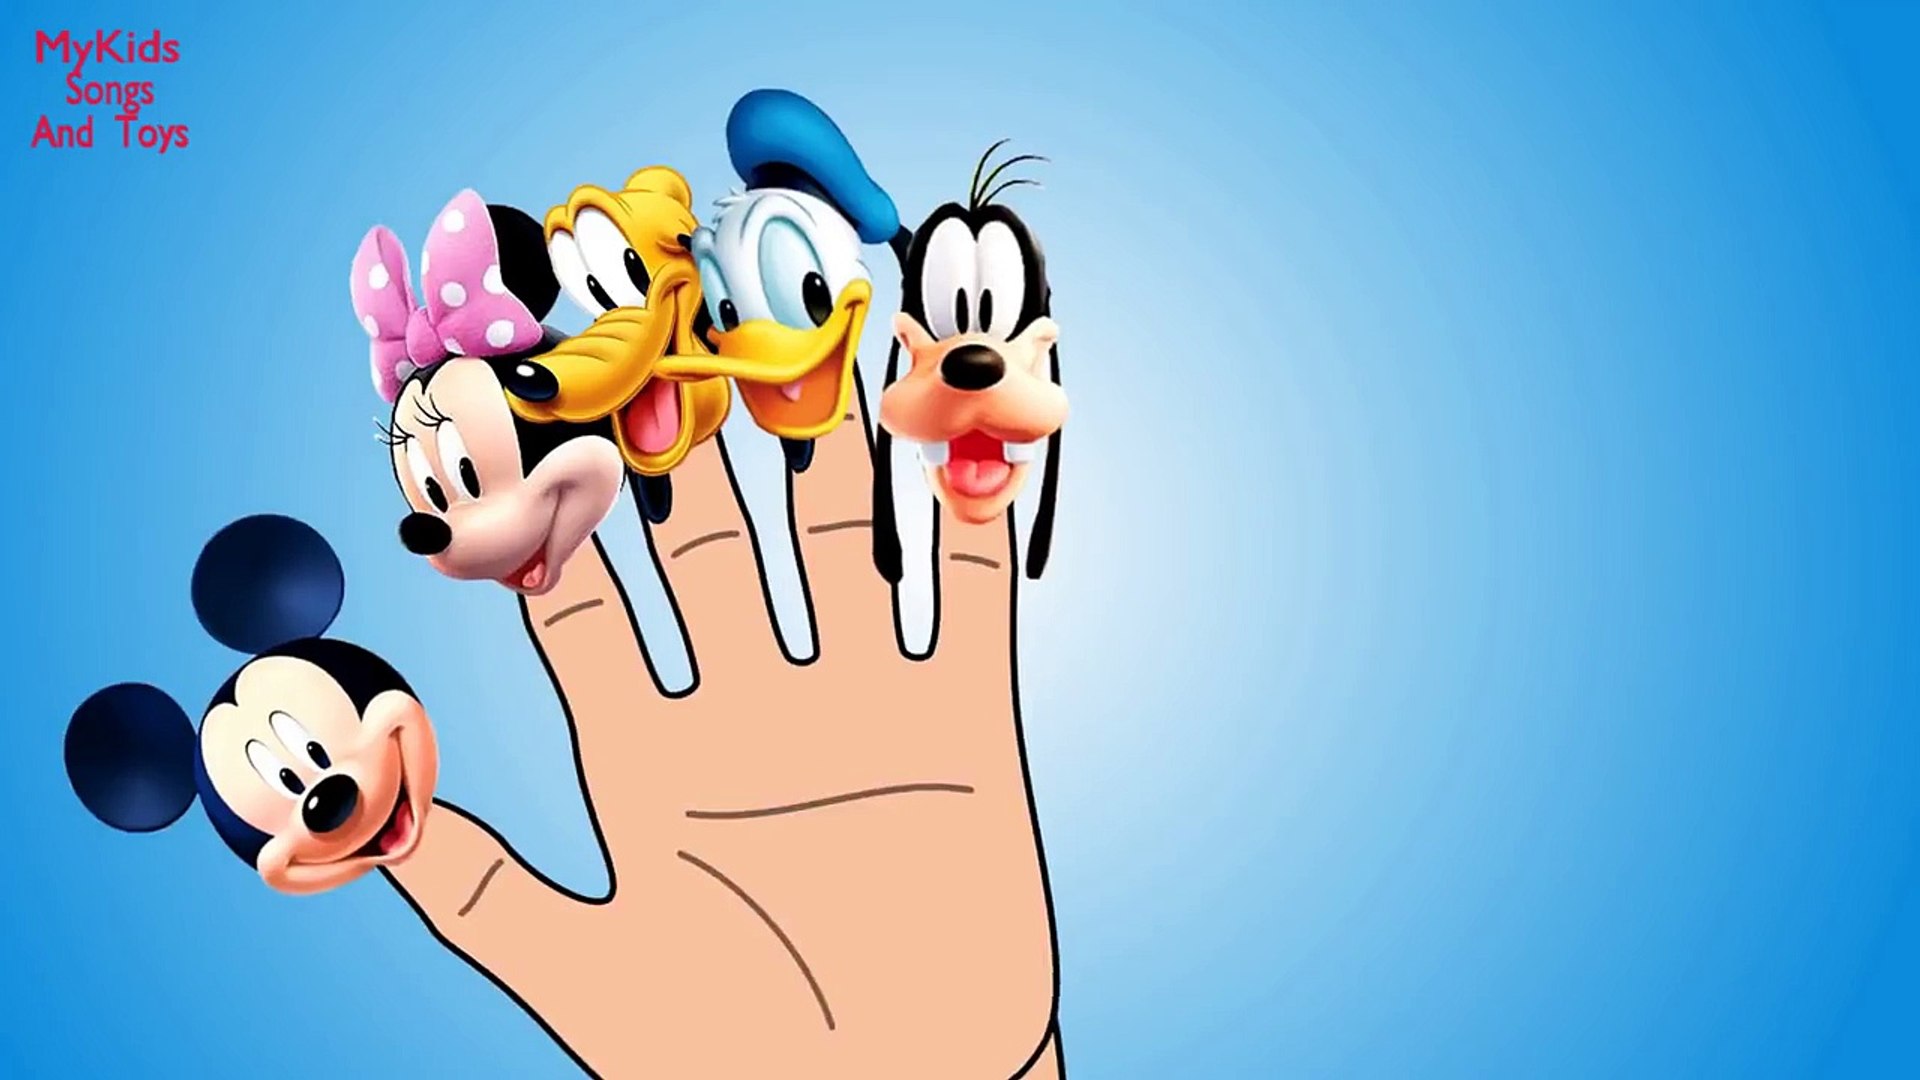 Lollipops Finger Family Song Mickey Mouse Donald Duck Goofy Nursery Rhyme -  Dailymotion Video